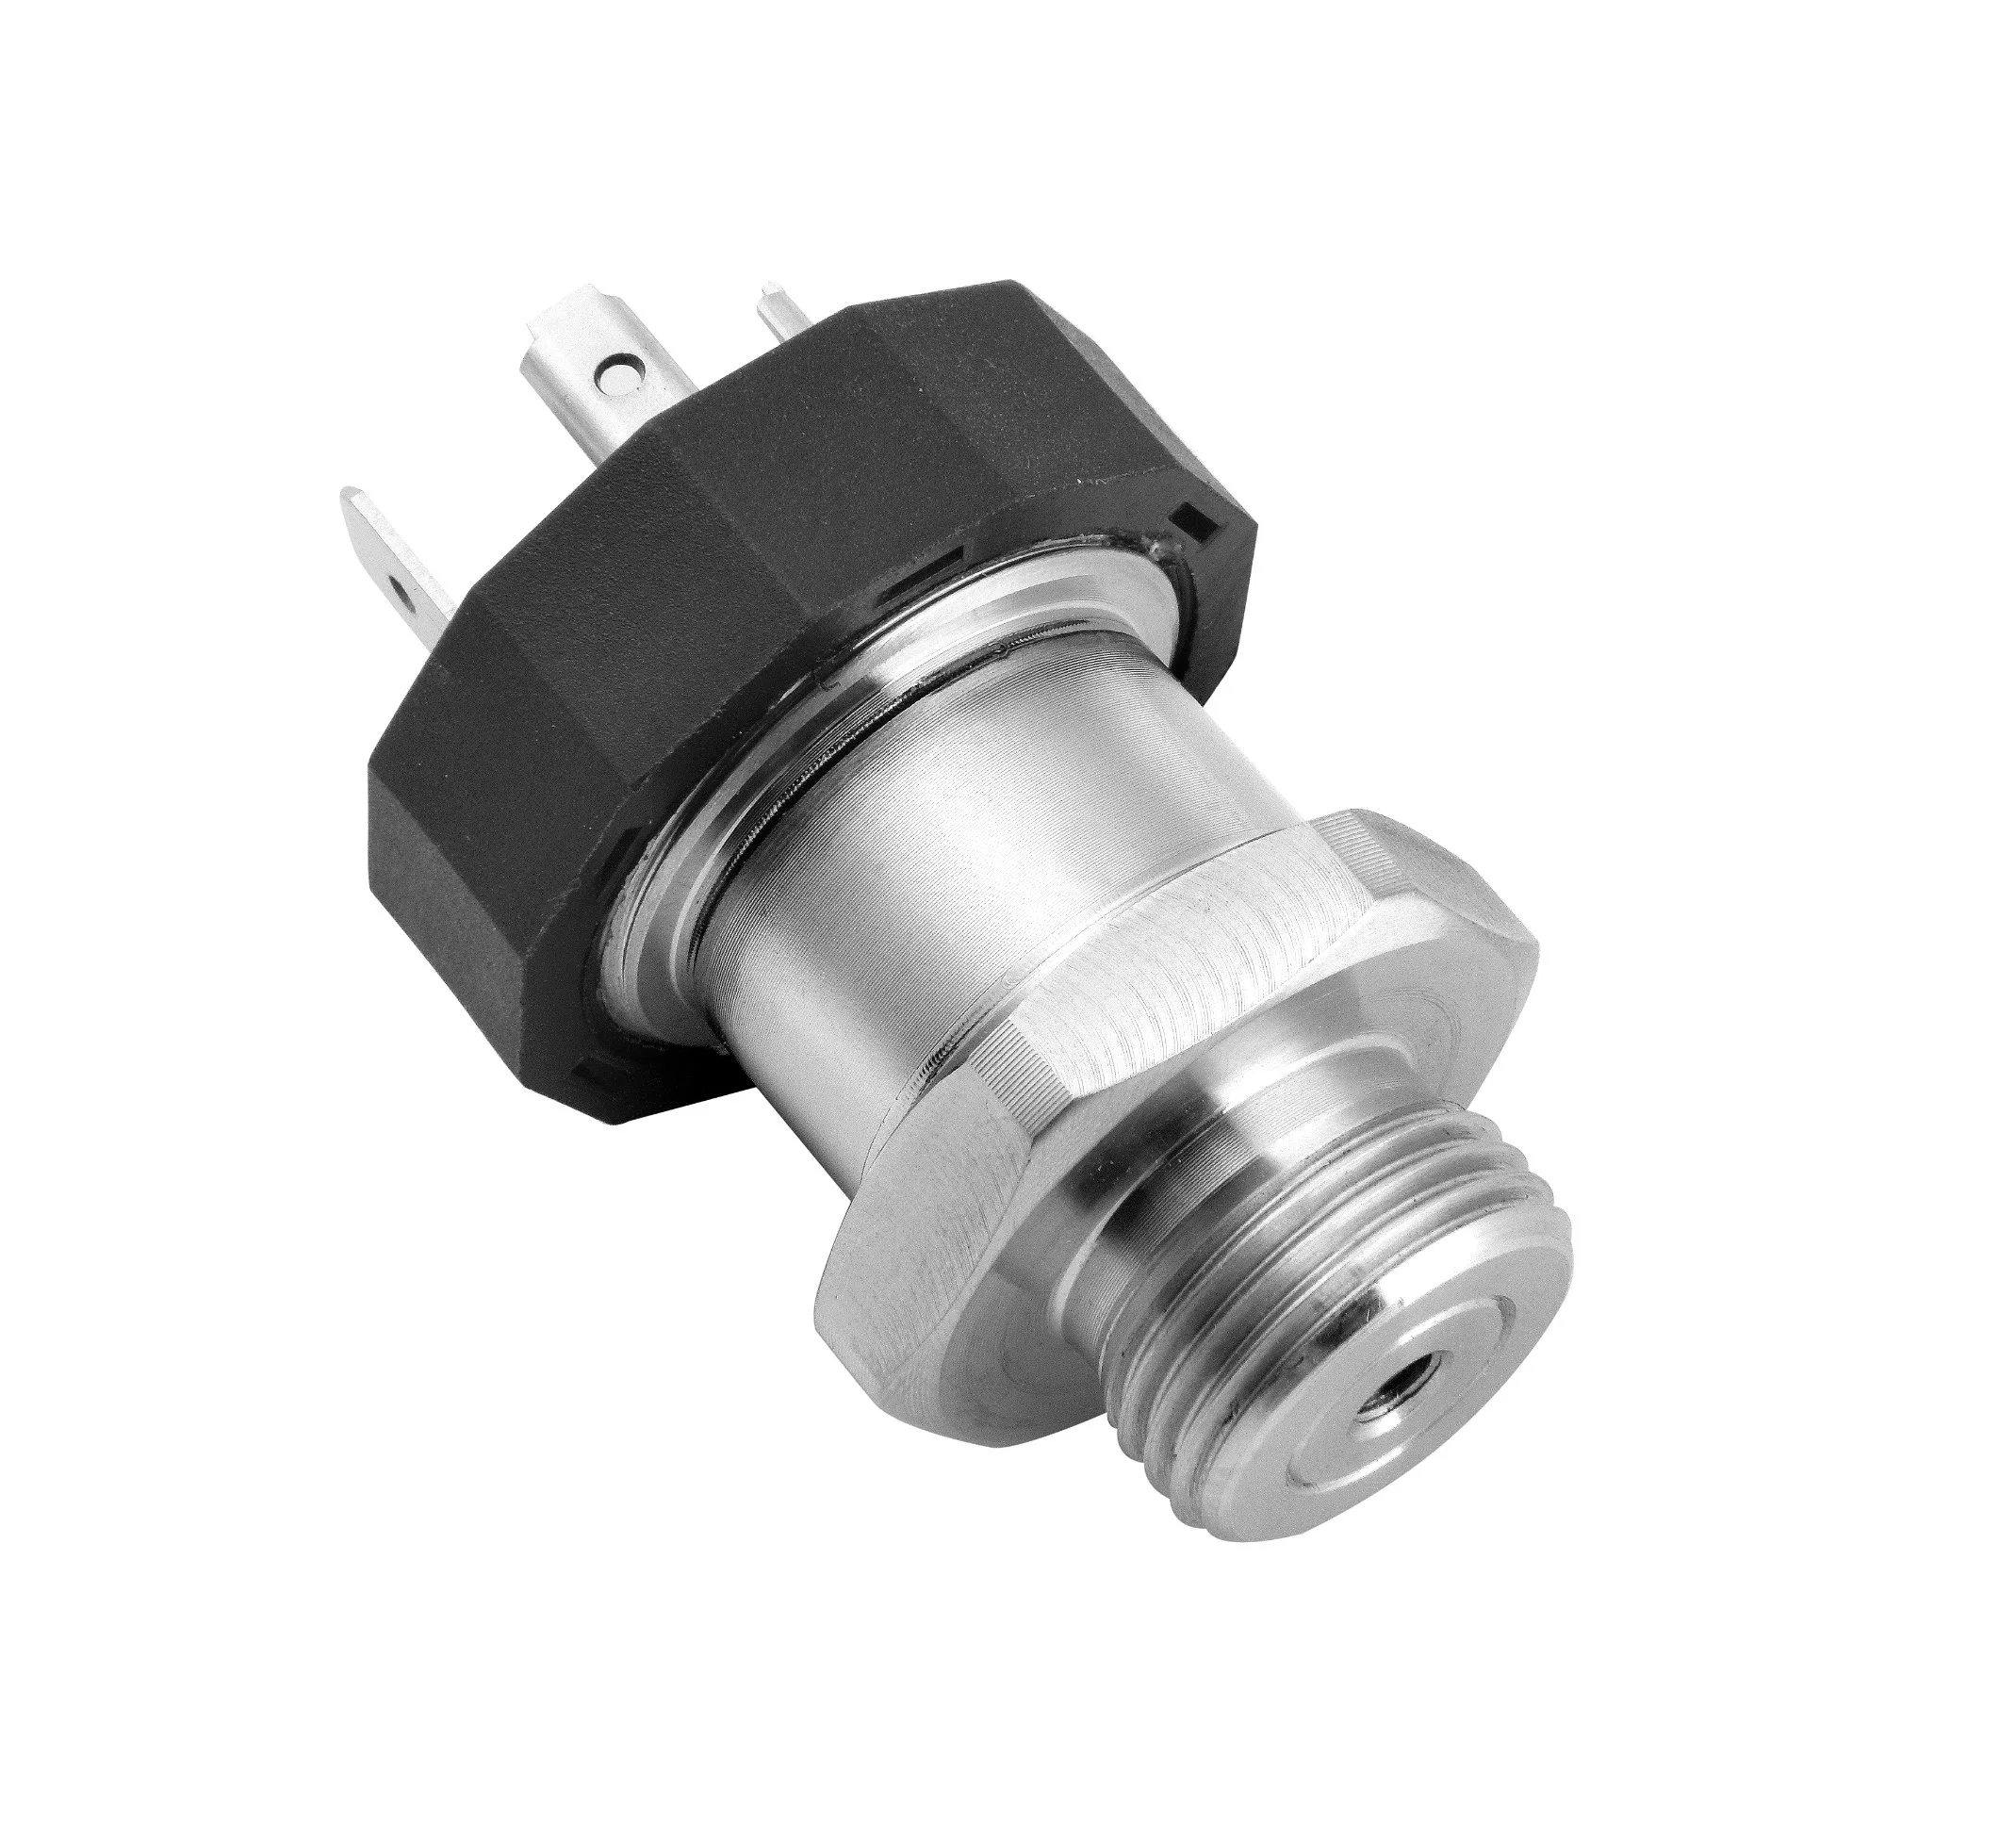 4-20mA, 0-5V, 0.5-4.5V, I2c Output Piezoresistive Silicon Pressure Transducer for Oil, Air and Water PCM390